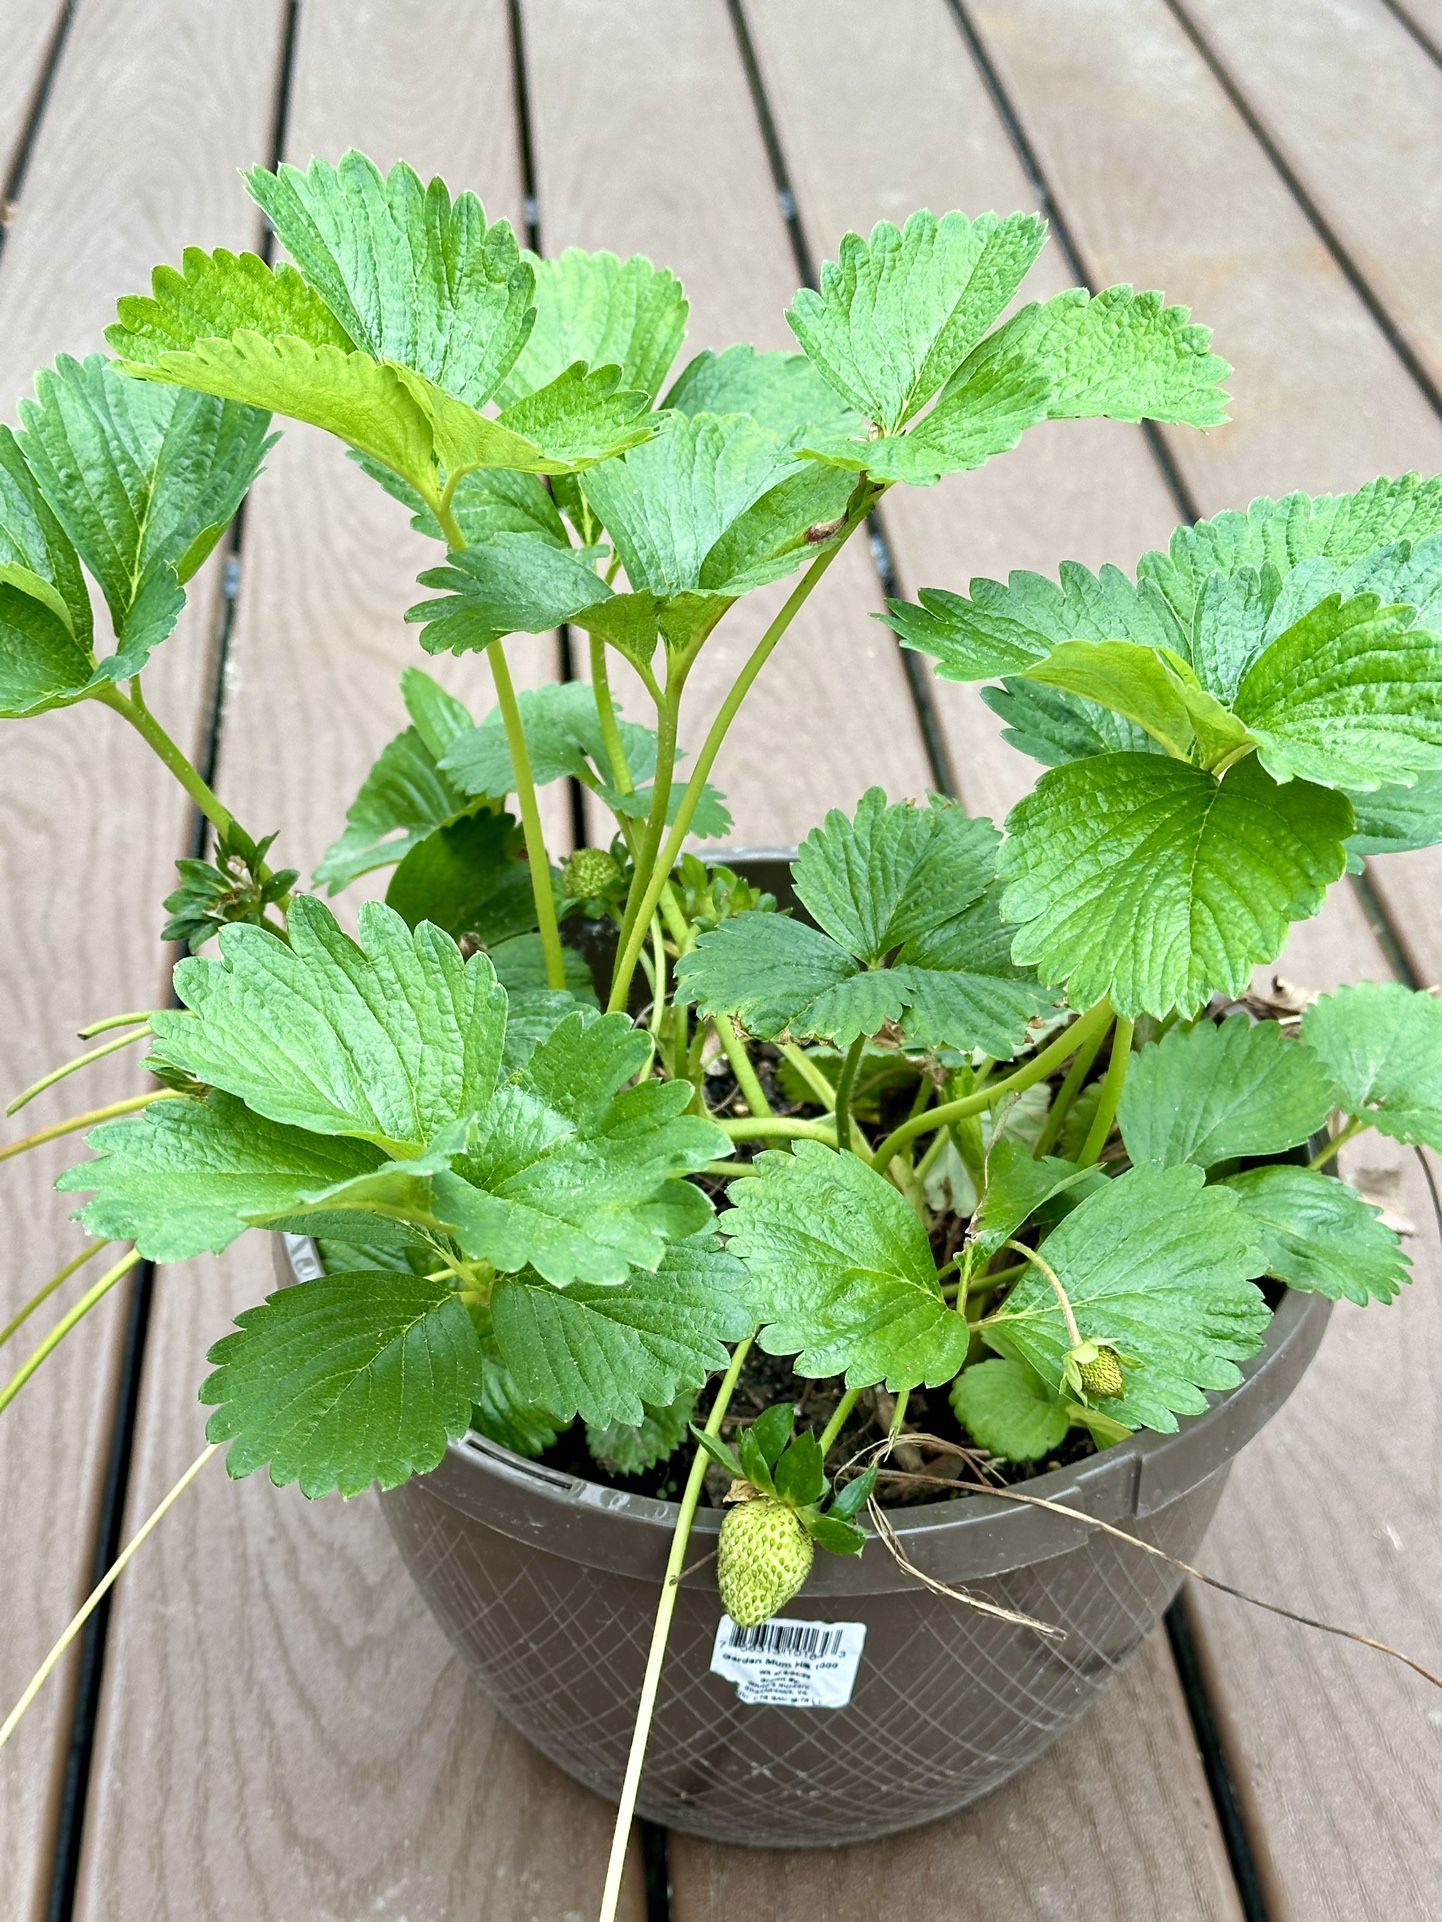 Strawberry Plant In 12.5” Or 10” Pot